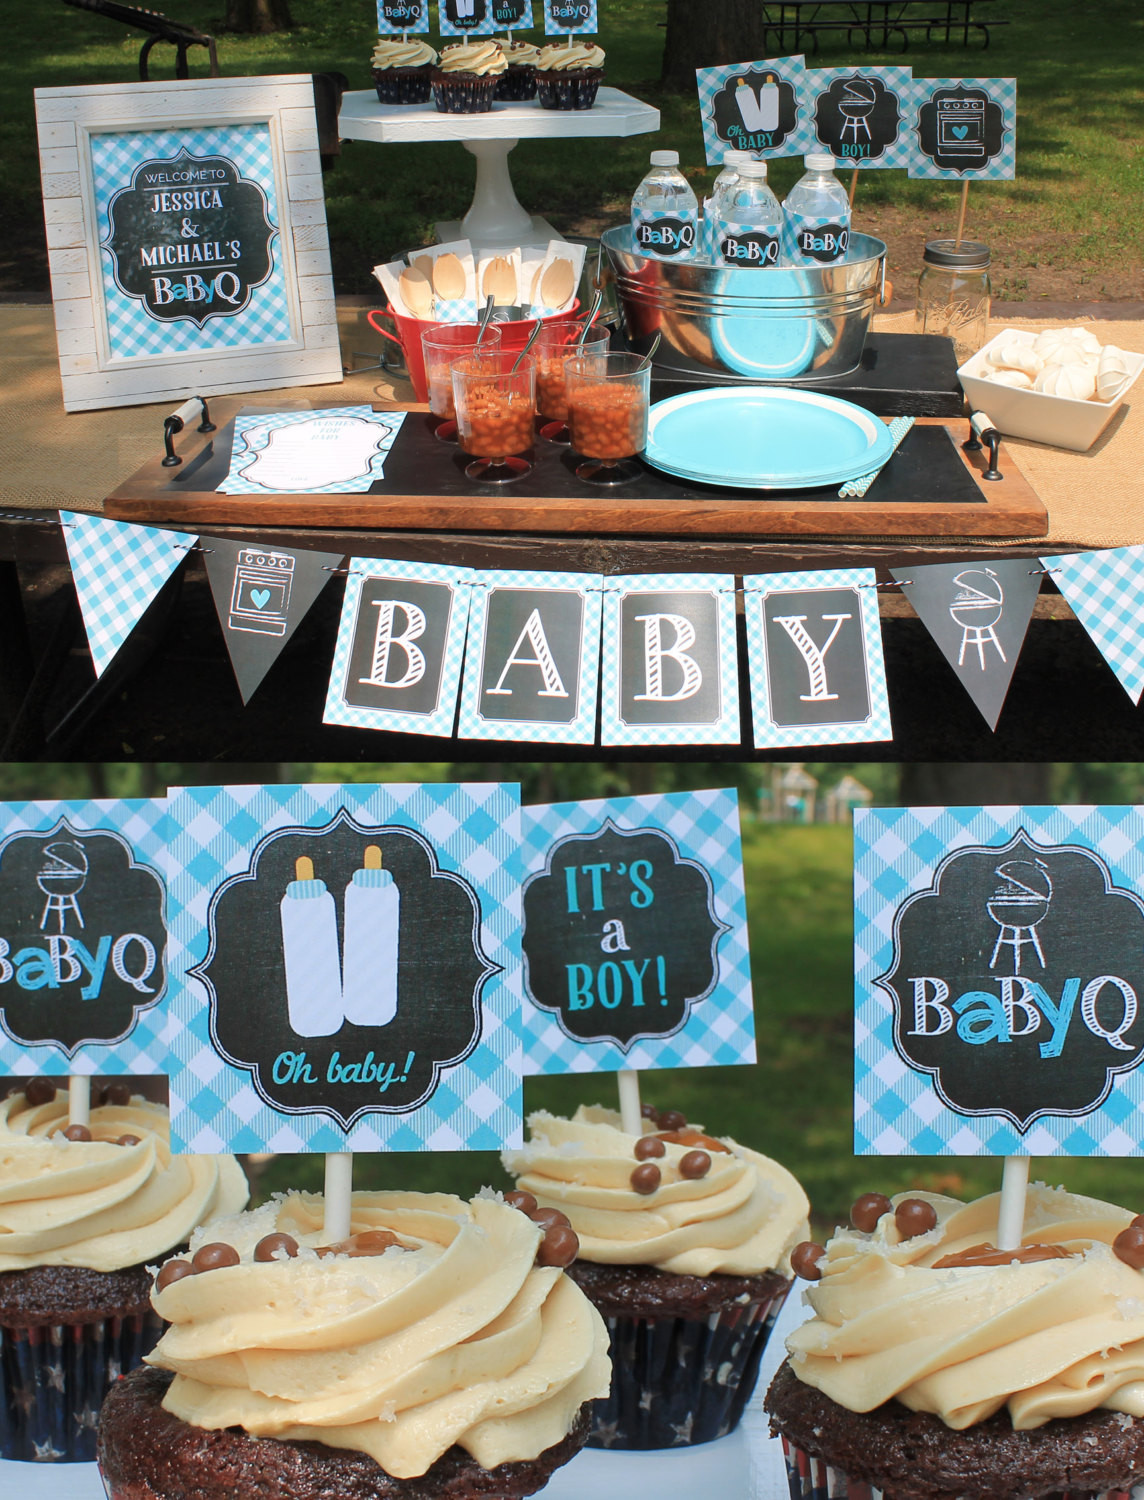 Decor For Baby Boy Shower
 Boy Baby Q Decorations blue baby q couples baby shower coed